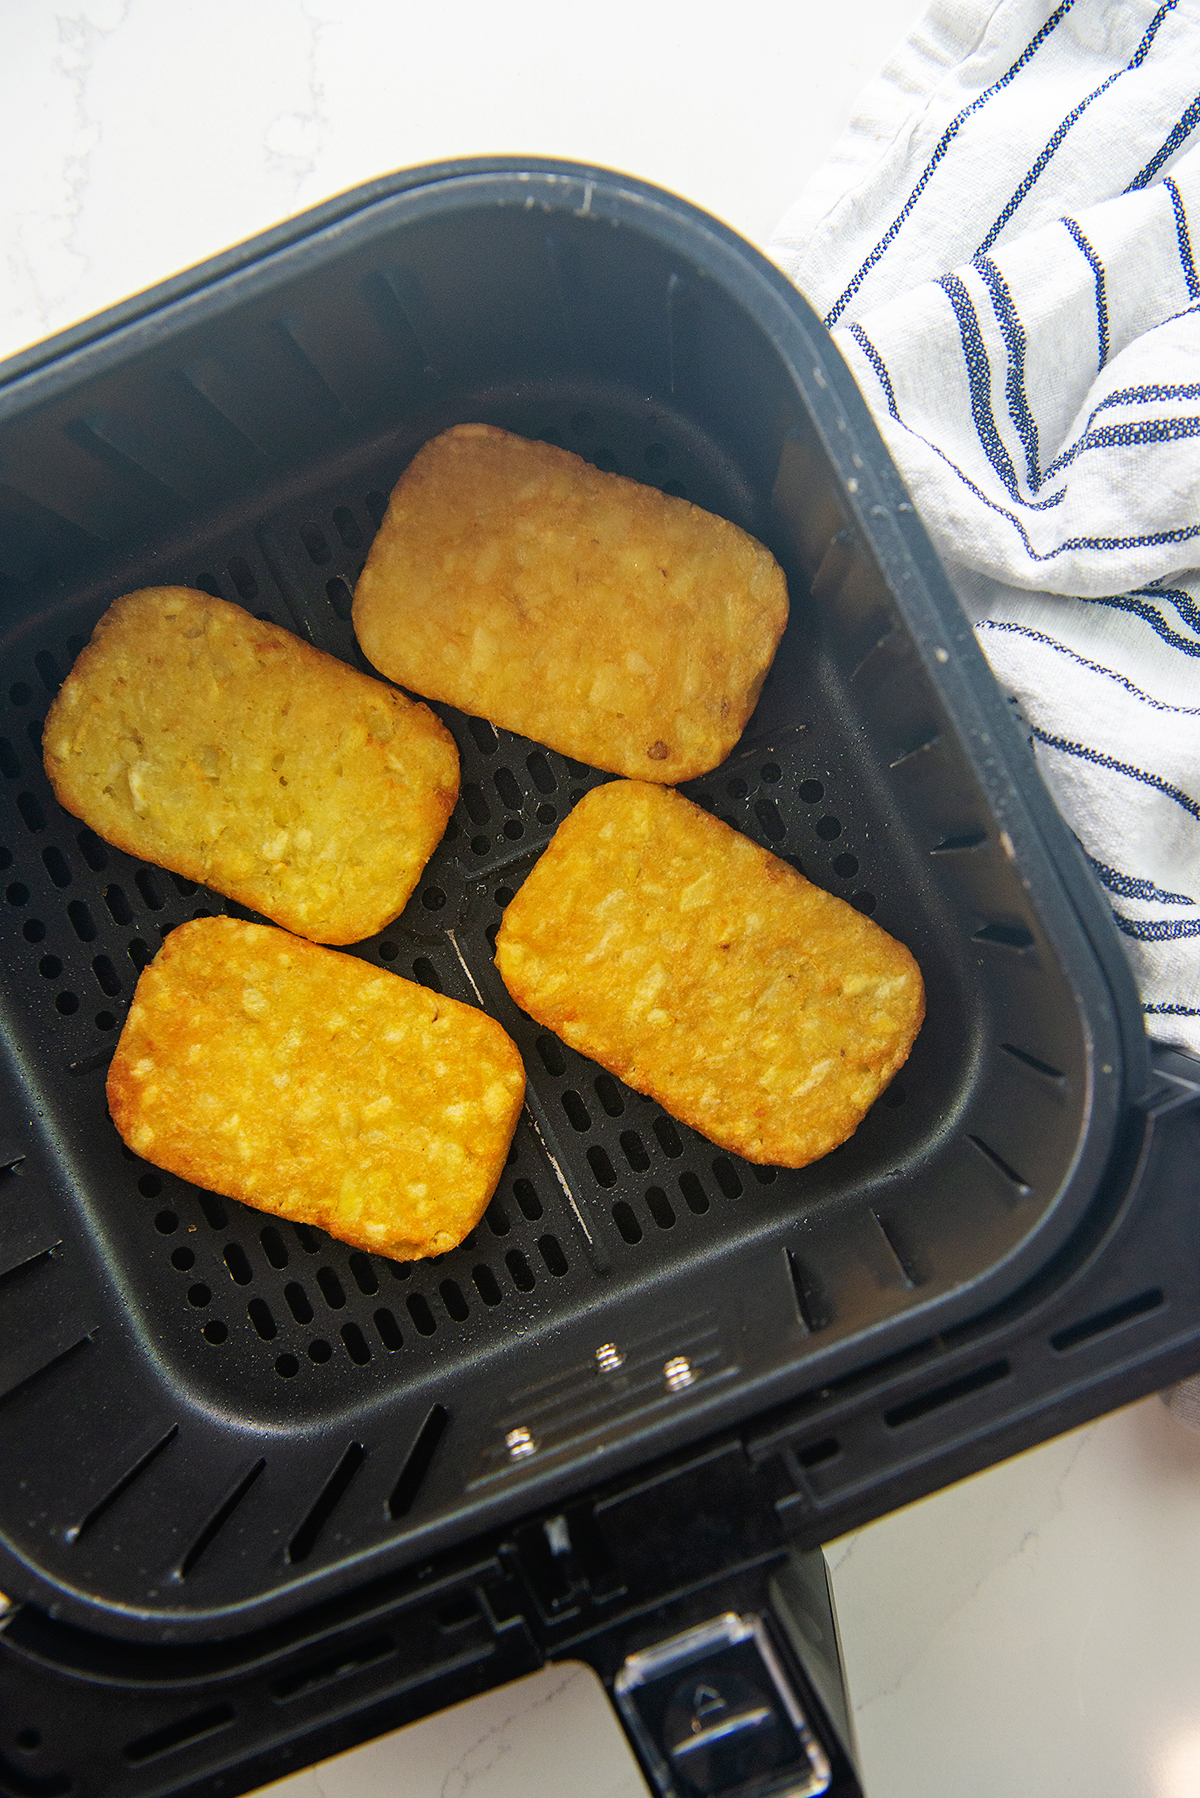 Four hashbrowns spread out in an air fryer basket.